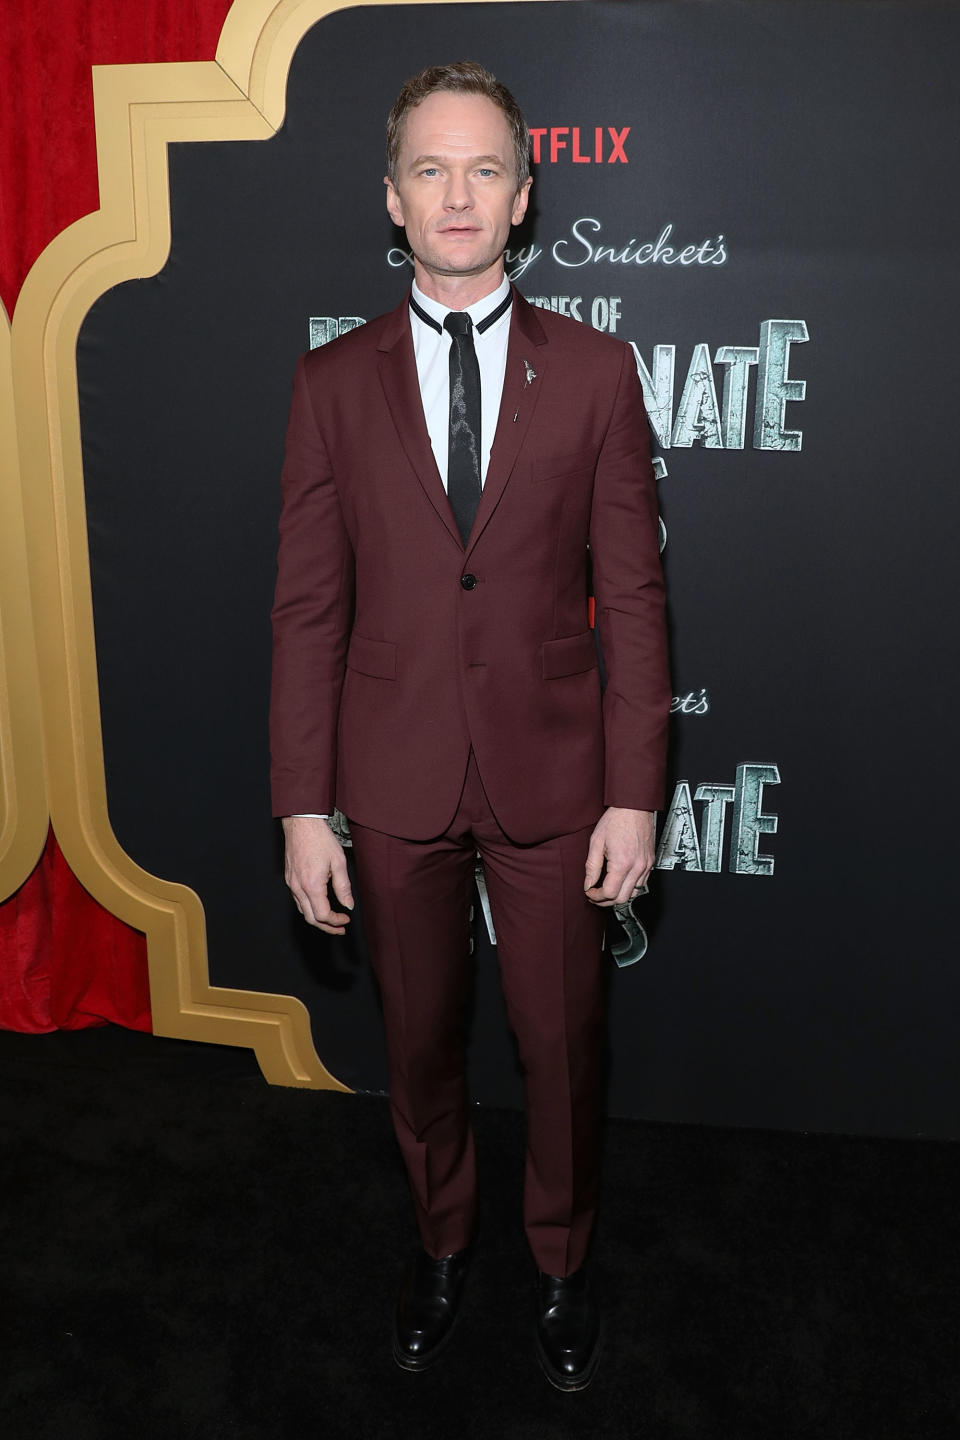 Neil Patrick Harris at the Netflix premiere of ‘A Series of Unfortunate Events’